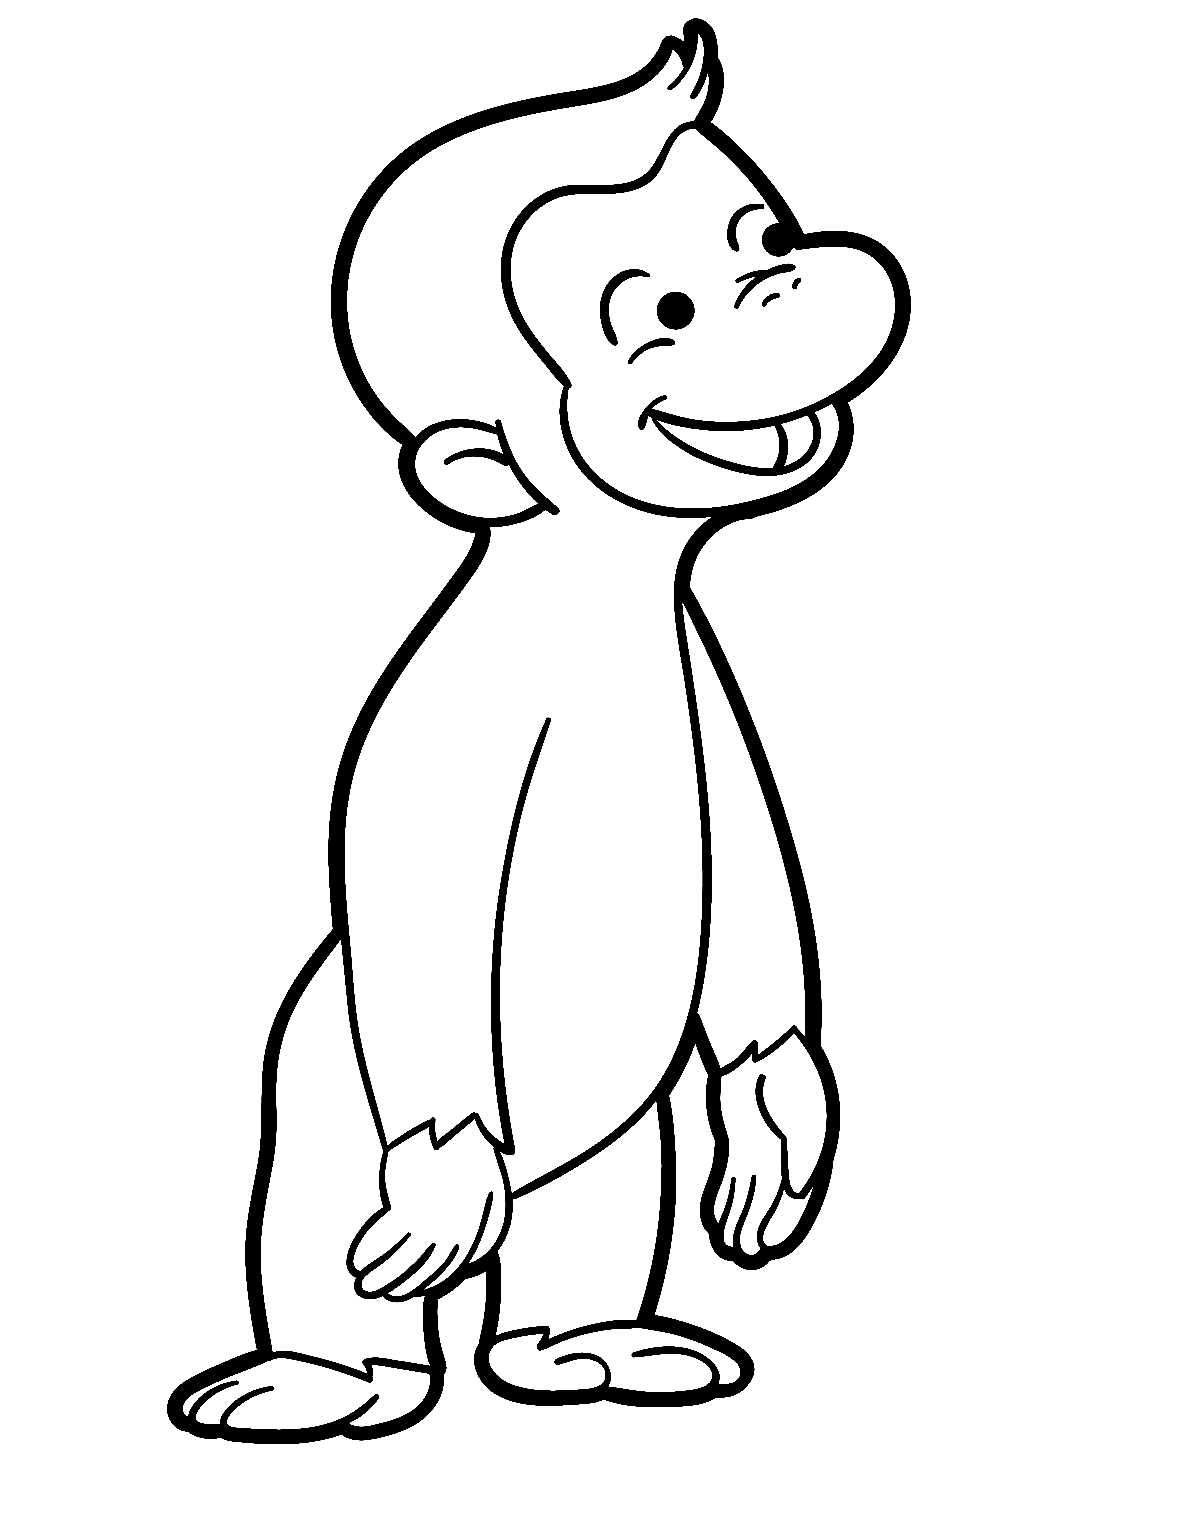 Curious George Coloring Page